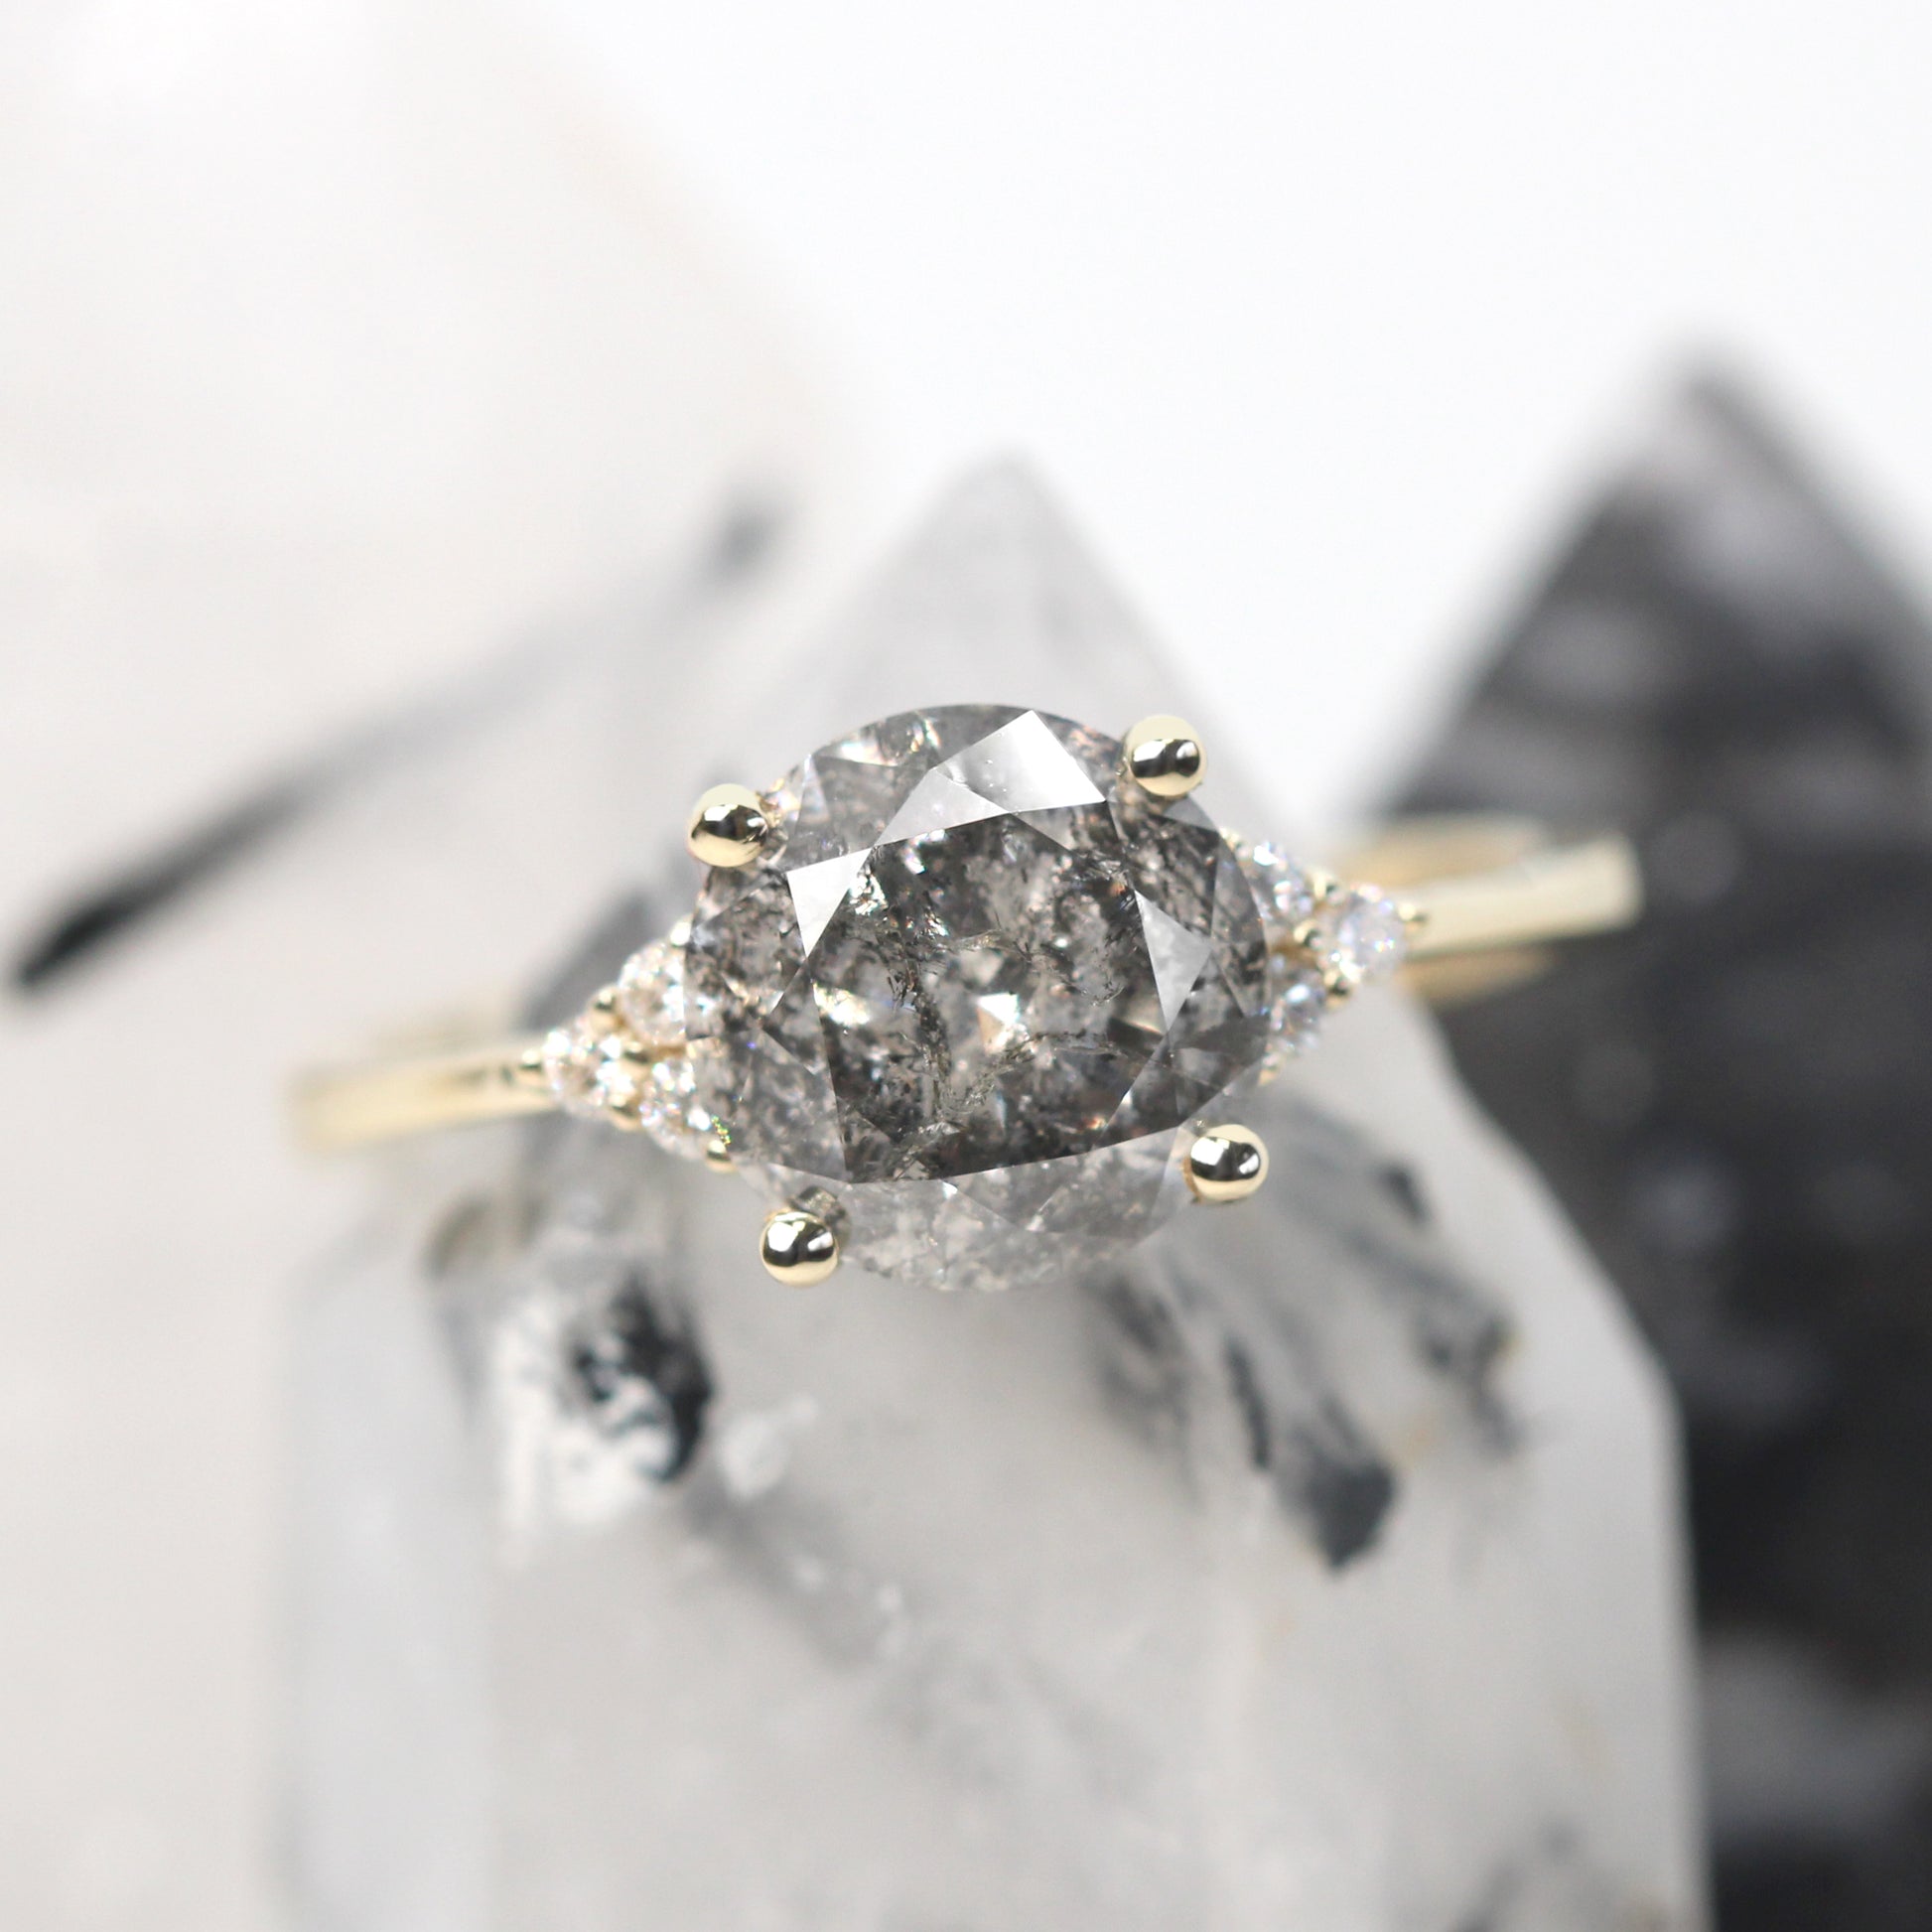 Imogene Ring with a 2.33 Carat Round Black Celestial Diamond and White Accent Diamonds in 14k Yellow Gold - Ready to Size and Ship - Midwinter Co. Alternative Bridal Rings and Modern Fine Jewelry